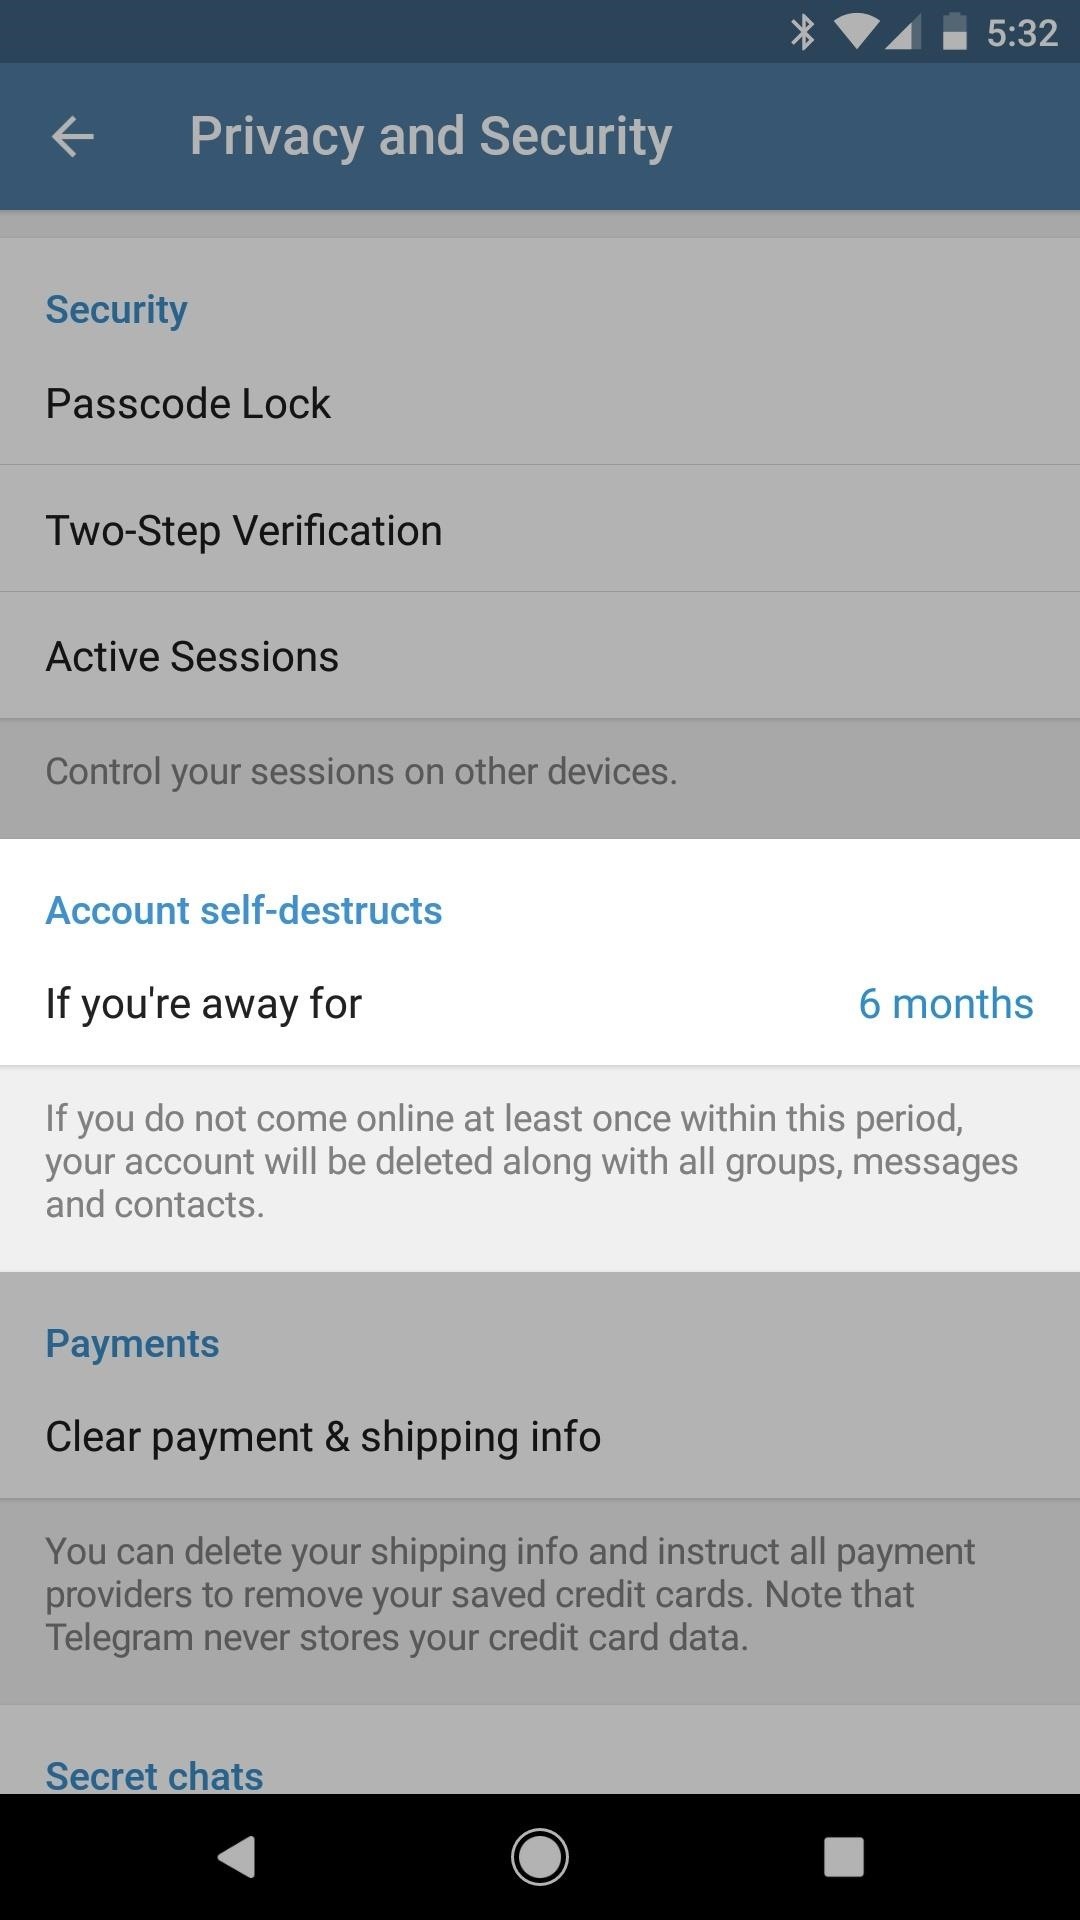 Telegram 101: How to Make Your Entire Account Self-Destruct (Or Just Delete It)